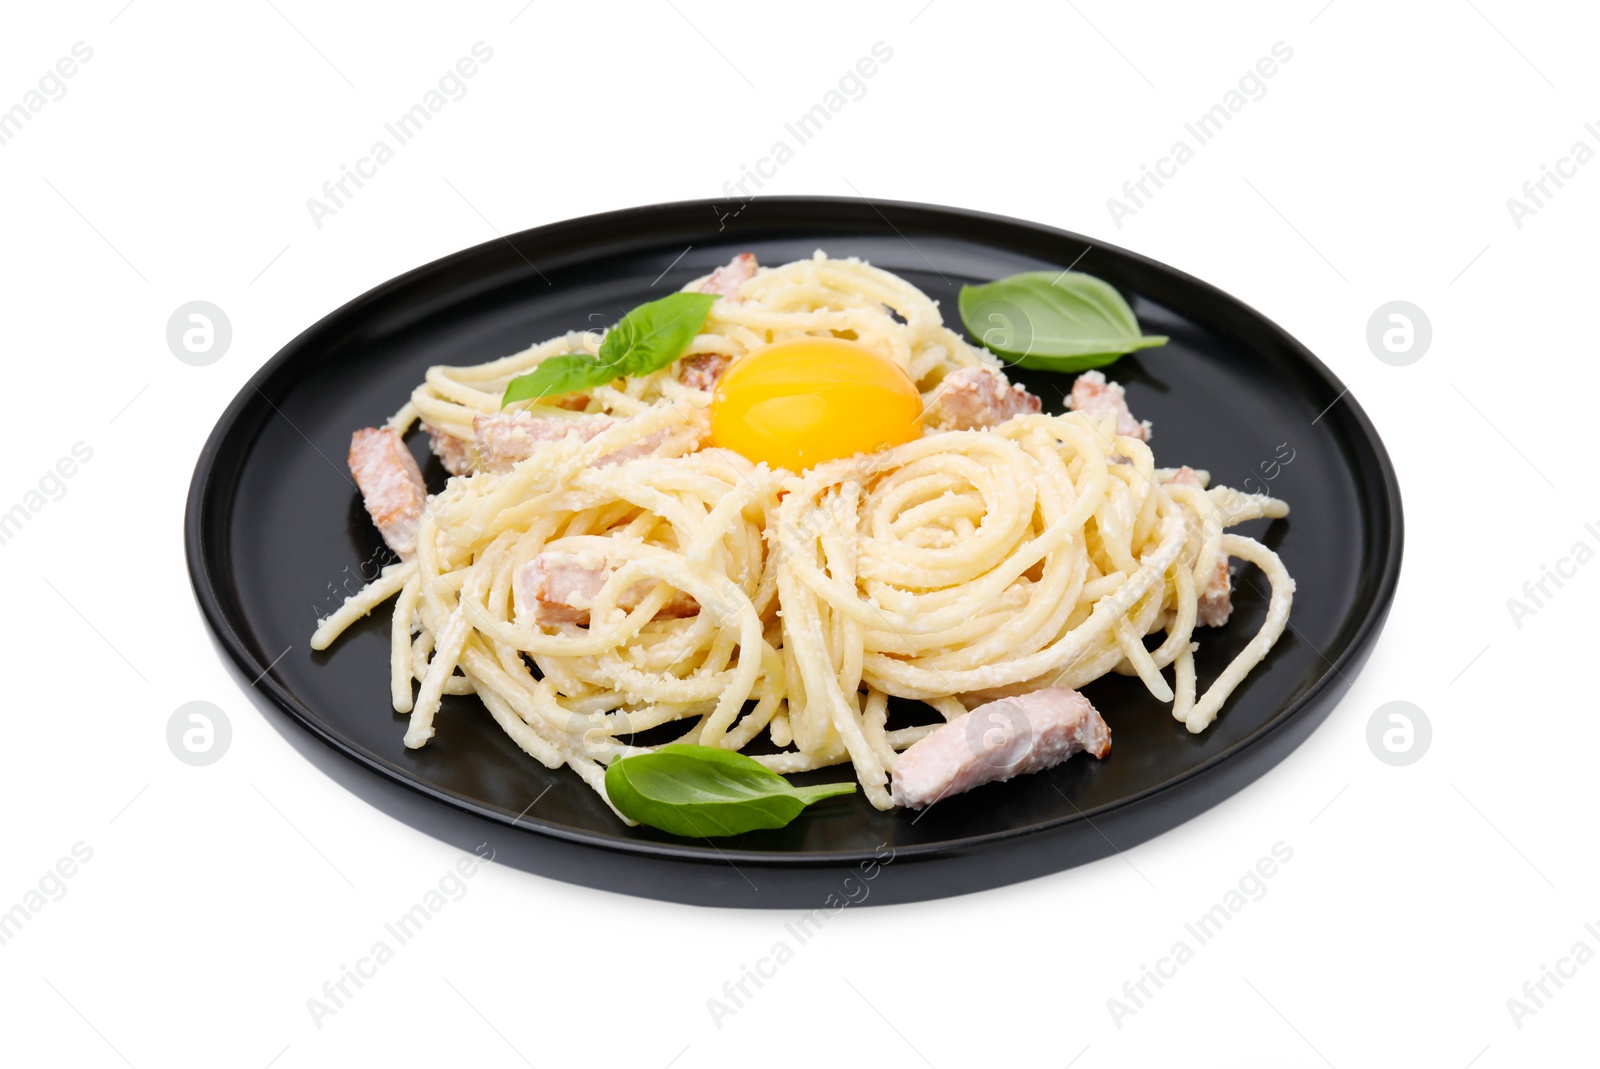 Photo of Plate of tasty pasta Carbonara with basil leaves and egg yolk isolated on white